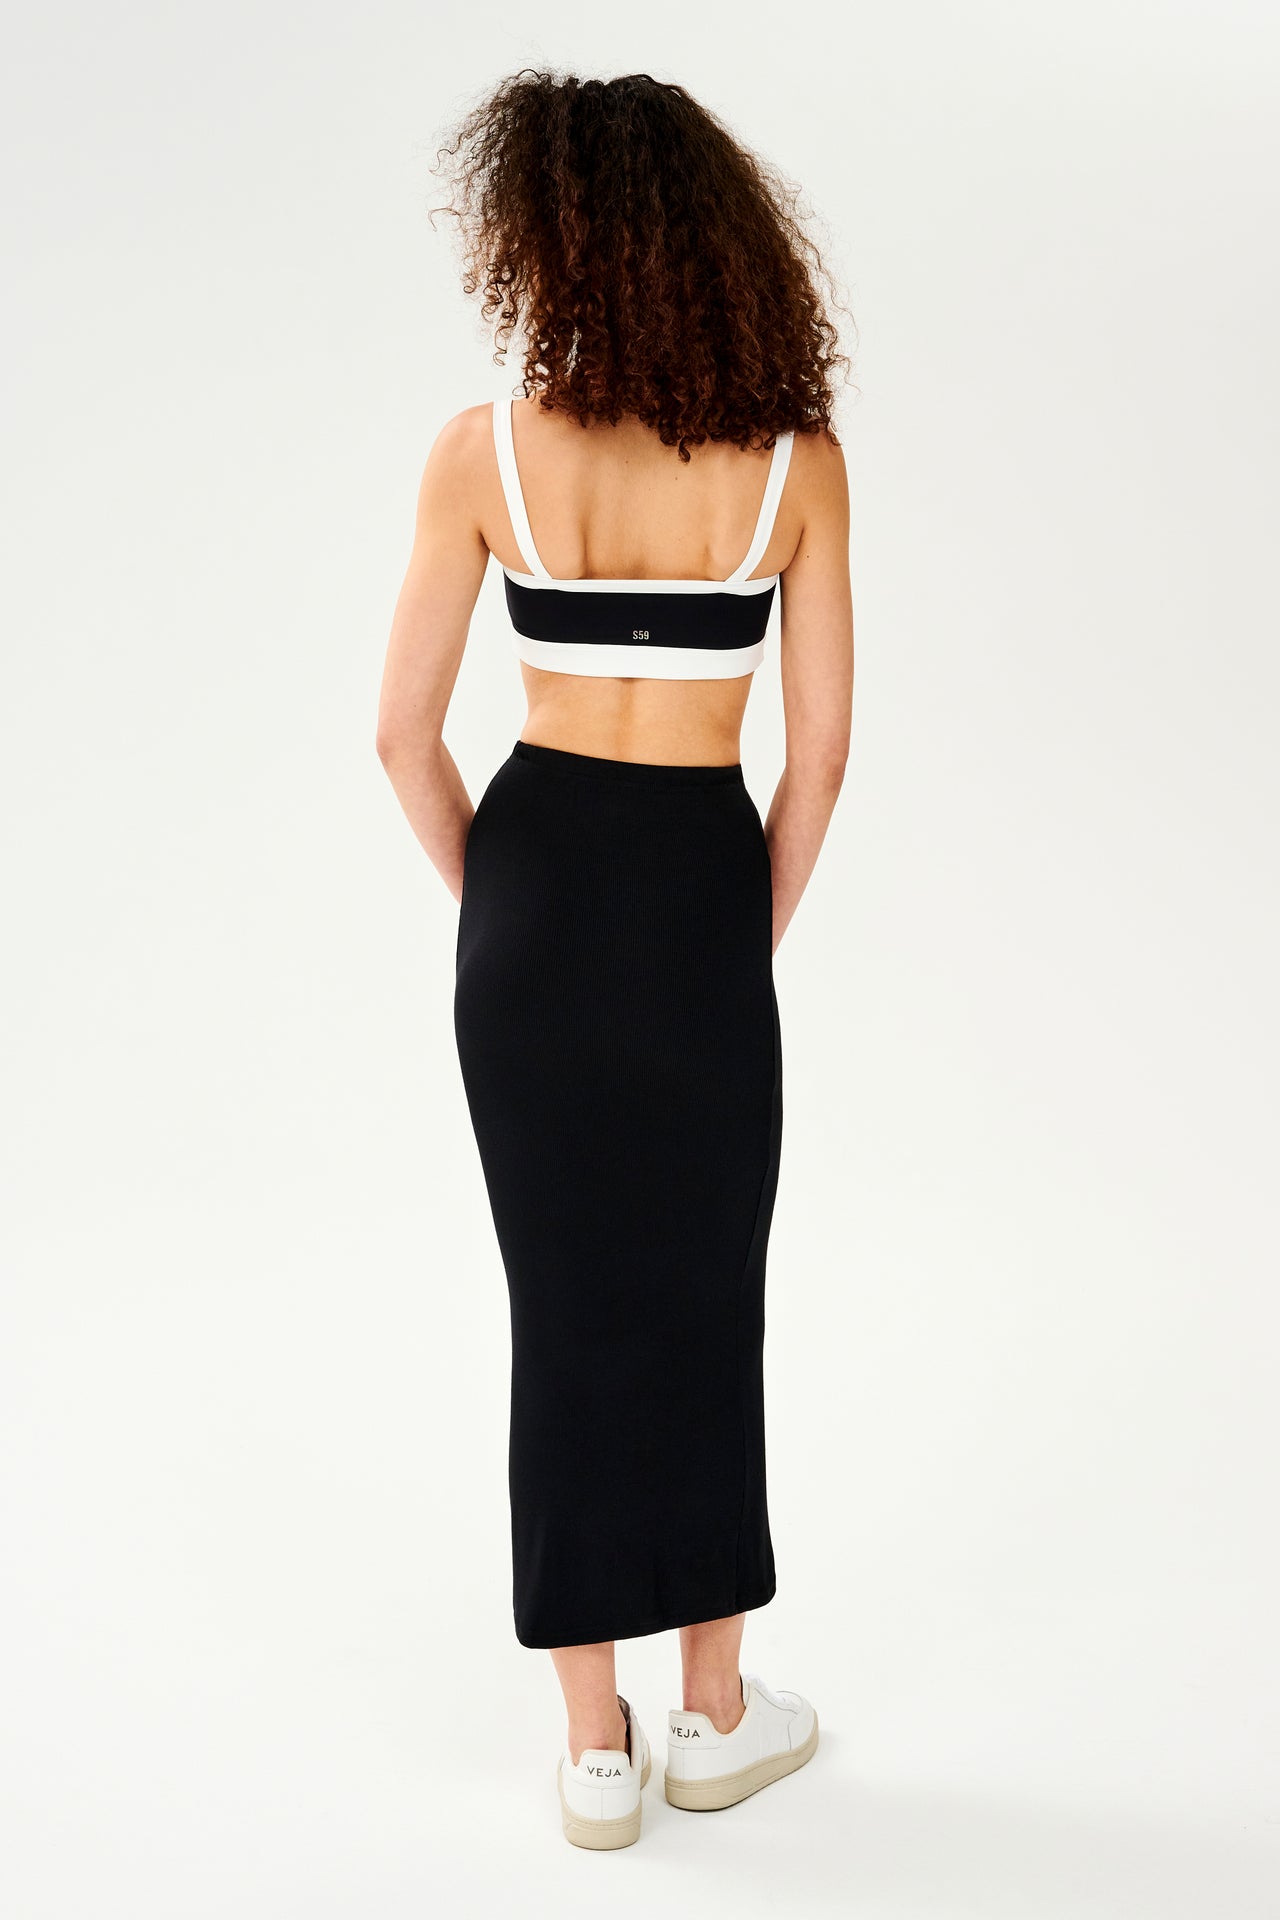 The back view of a woman lounging at home in a black and white SPLITS59 Kiki Rib Maxi Skirt.